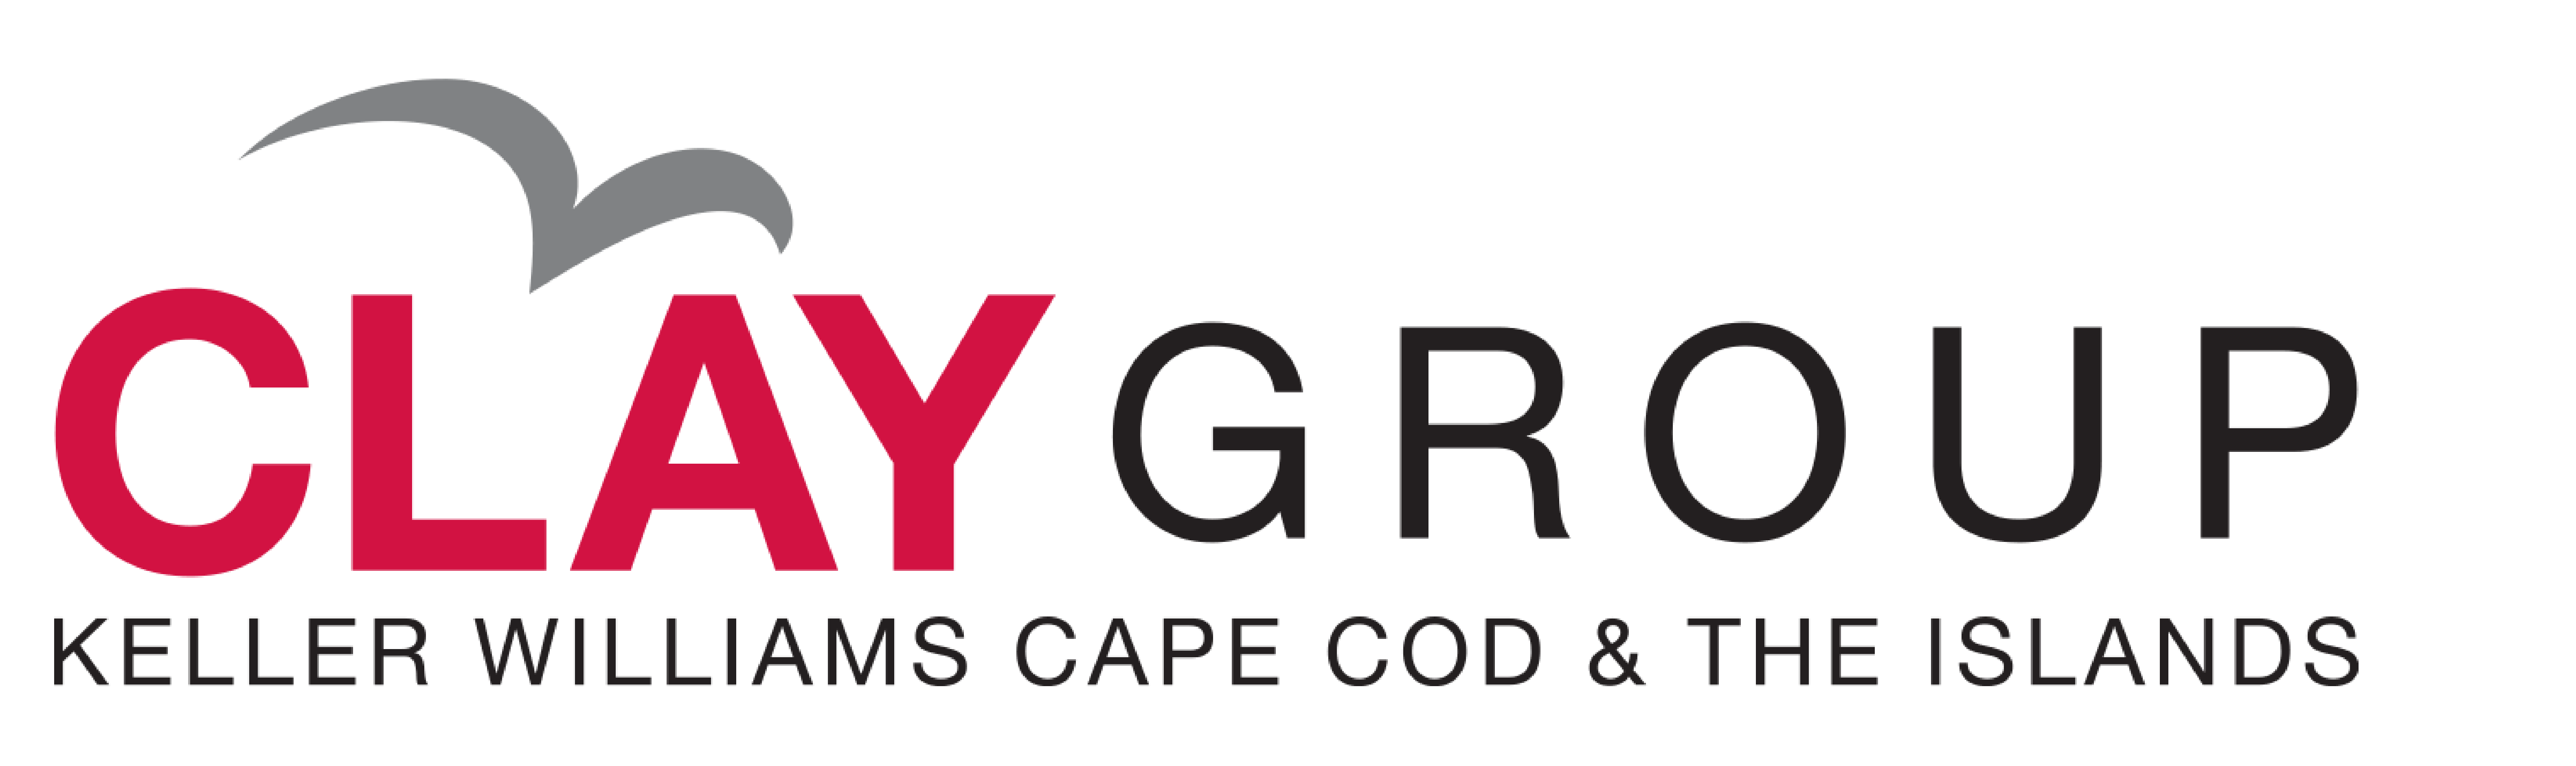 The Clay Group - Keller Williams